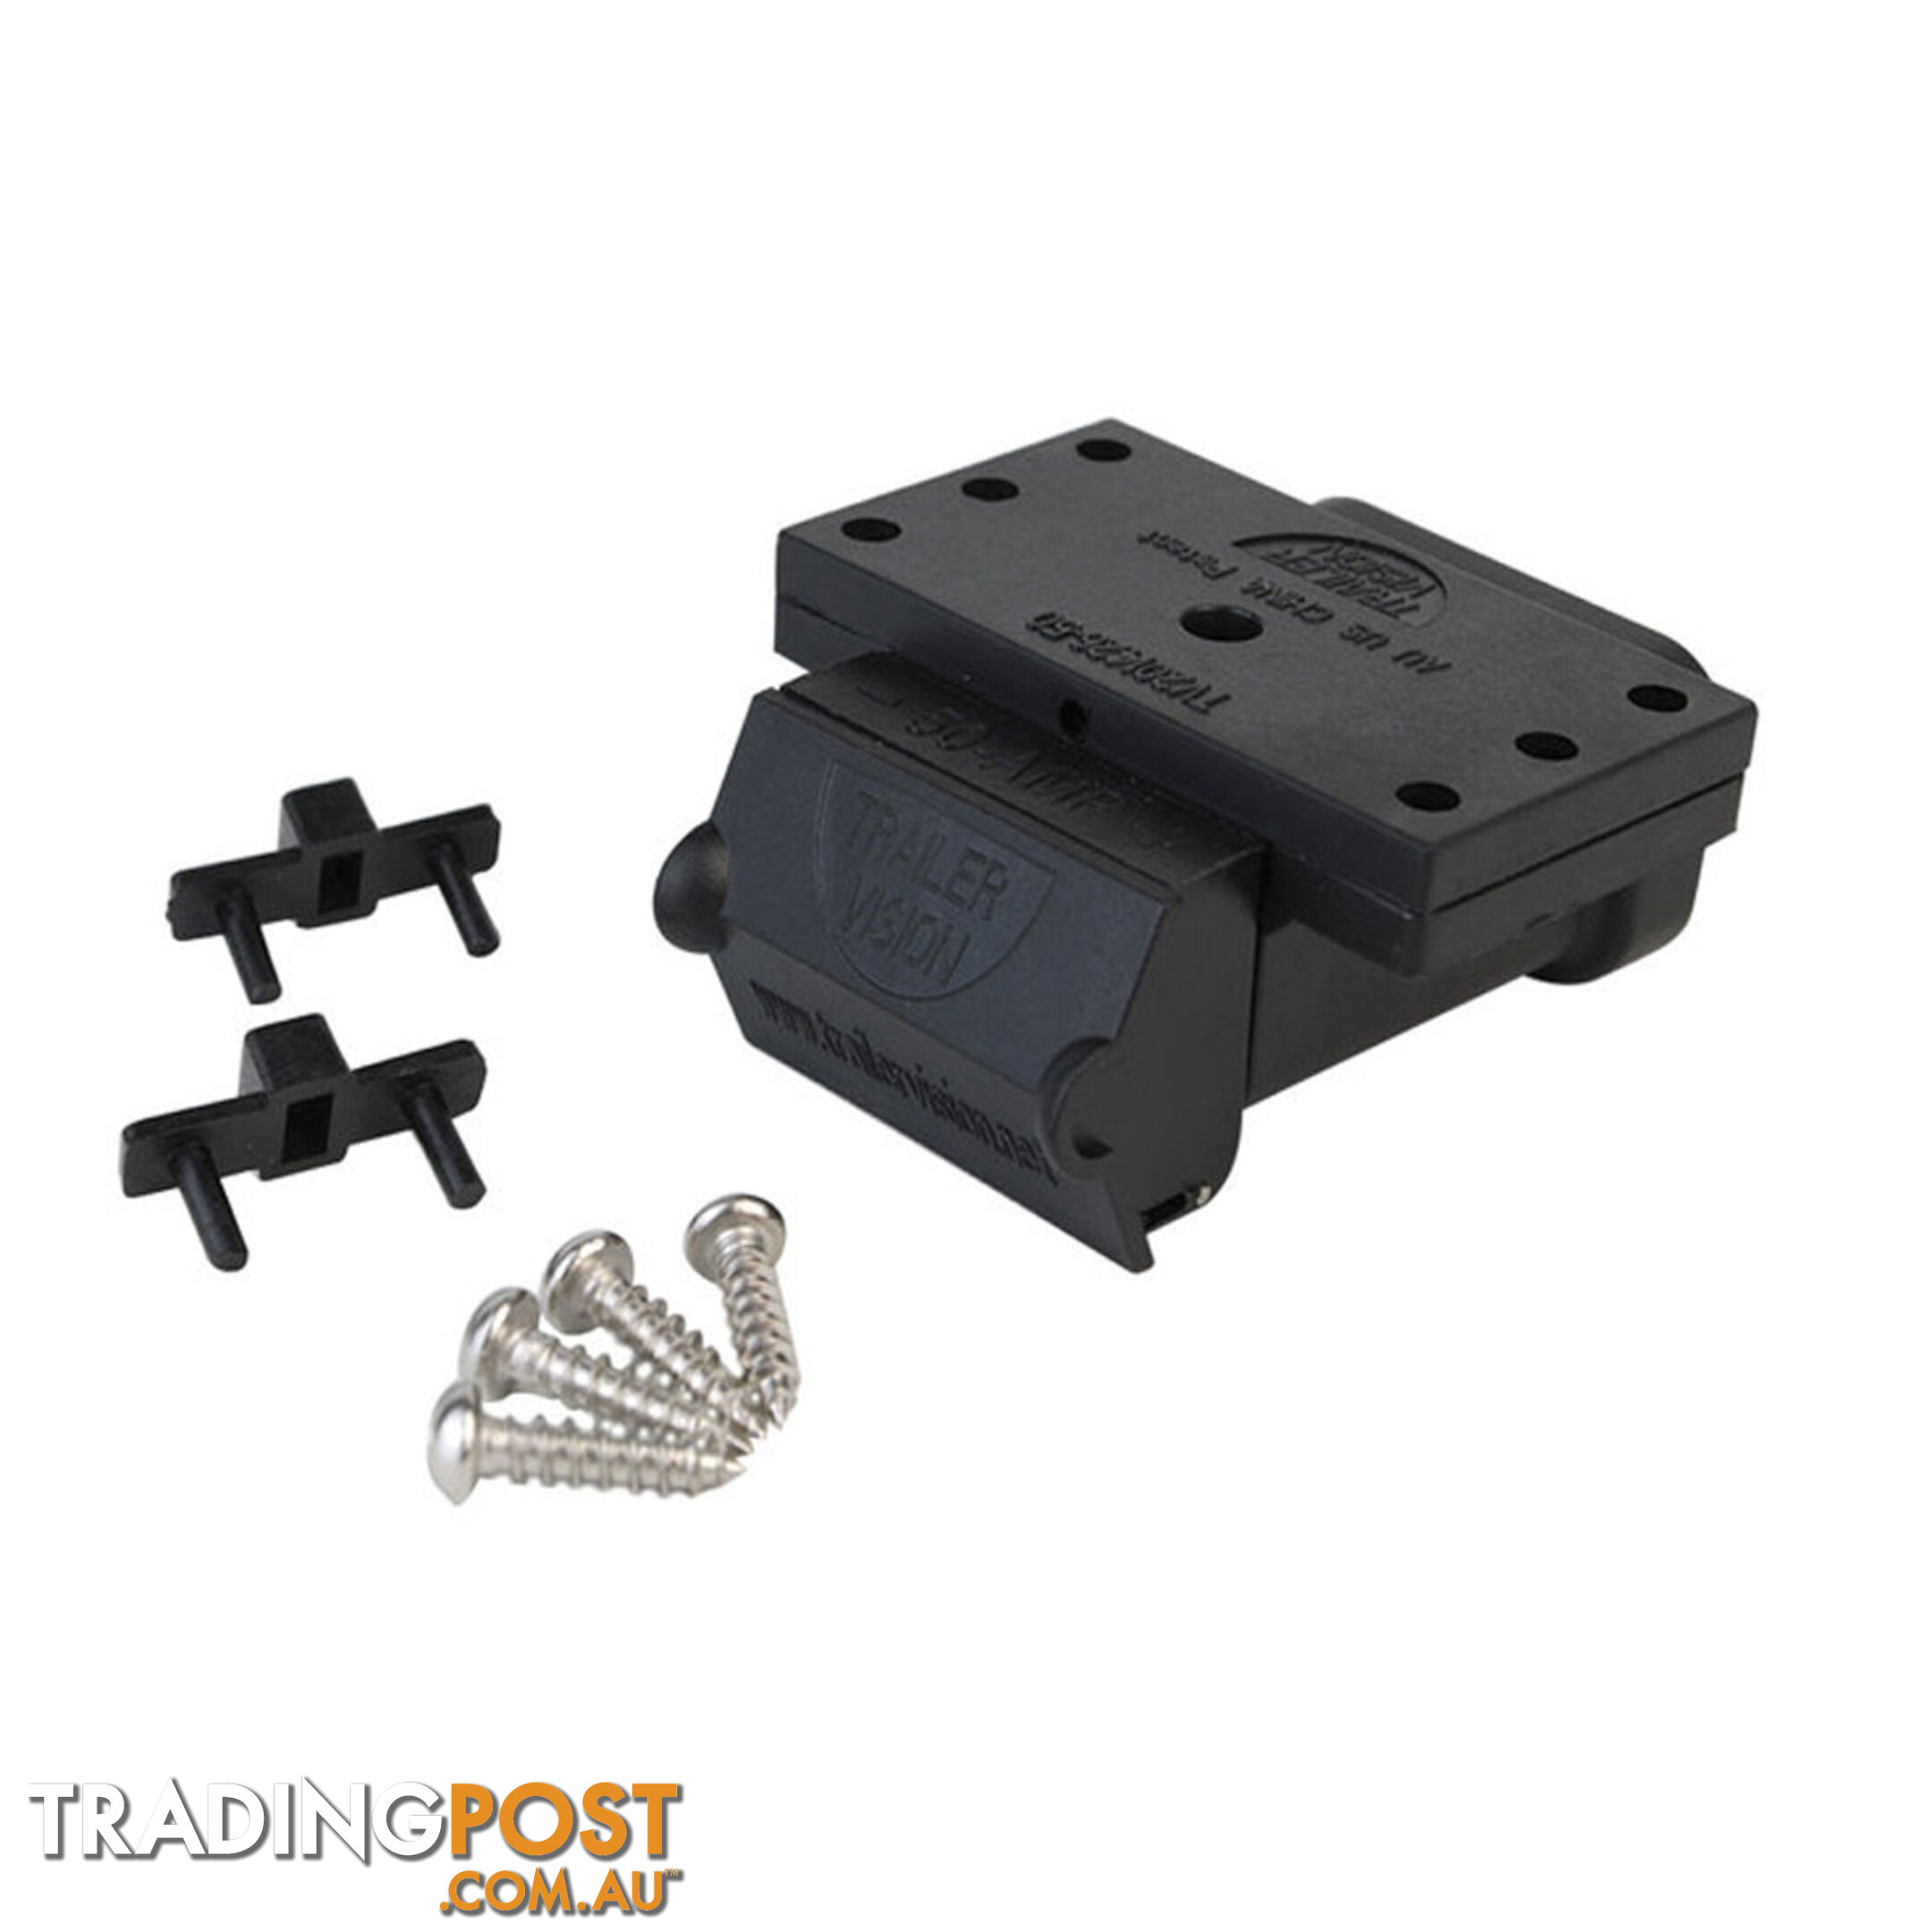 Tailer Vision 120 amp Anderson Plug Surface Mounting Kit Assembly with LED SKU - TV201426-120